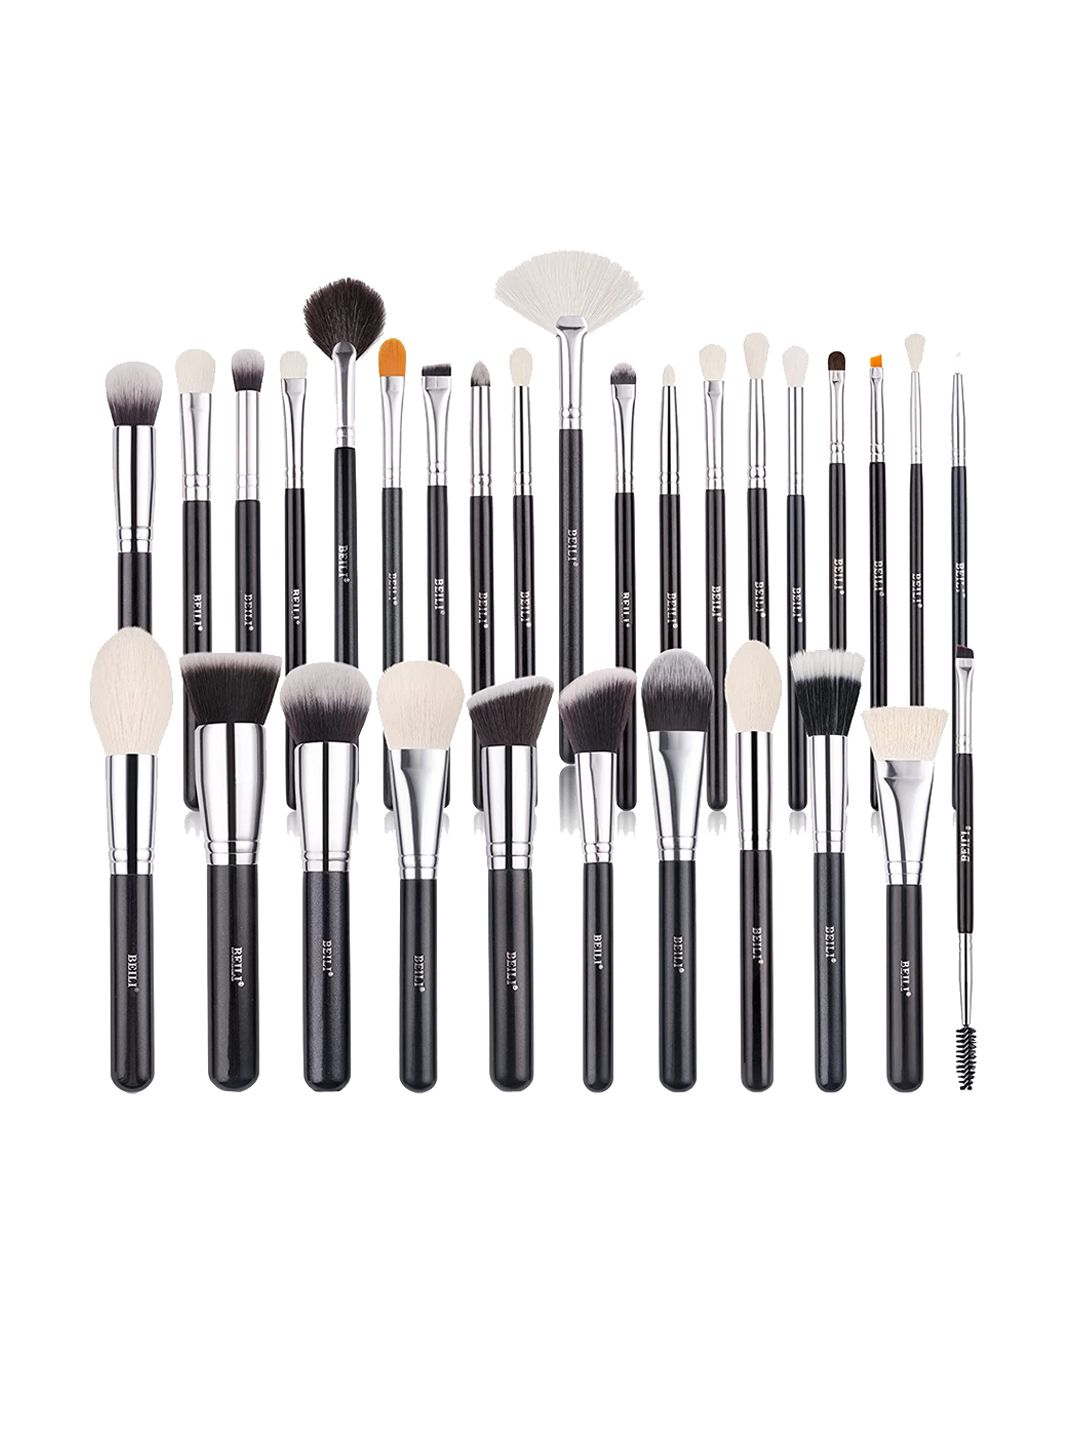 BEILI Women's Set of 30 Professional Goat Hair Makeup Brushes Price in India